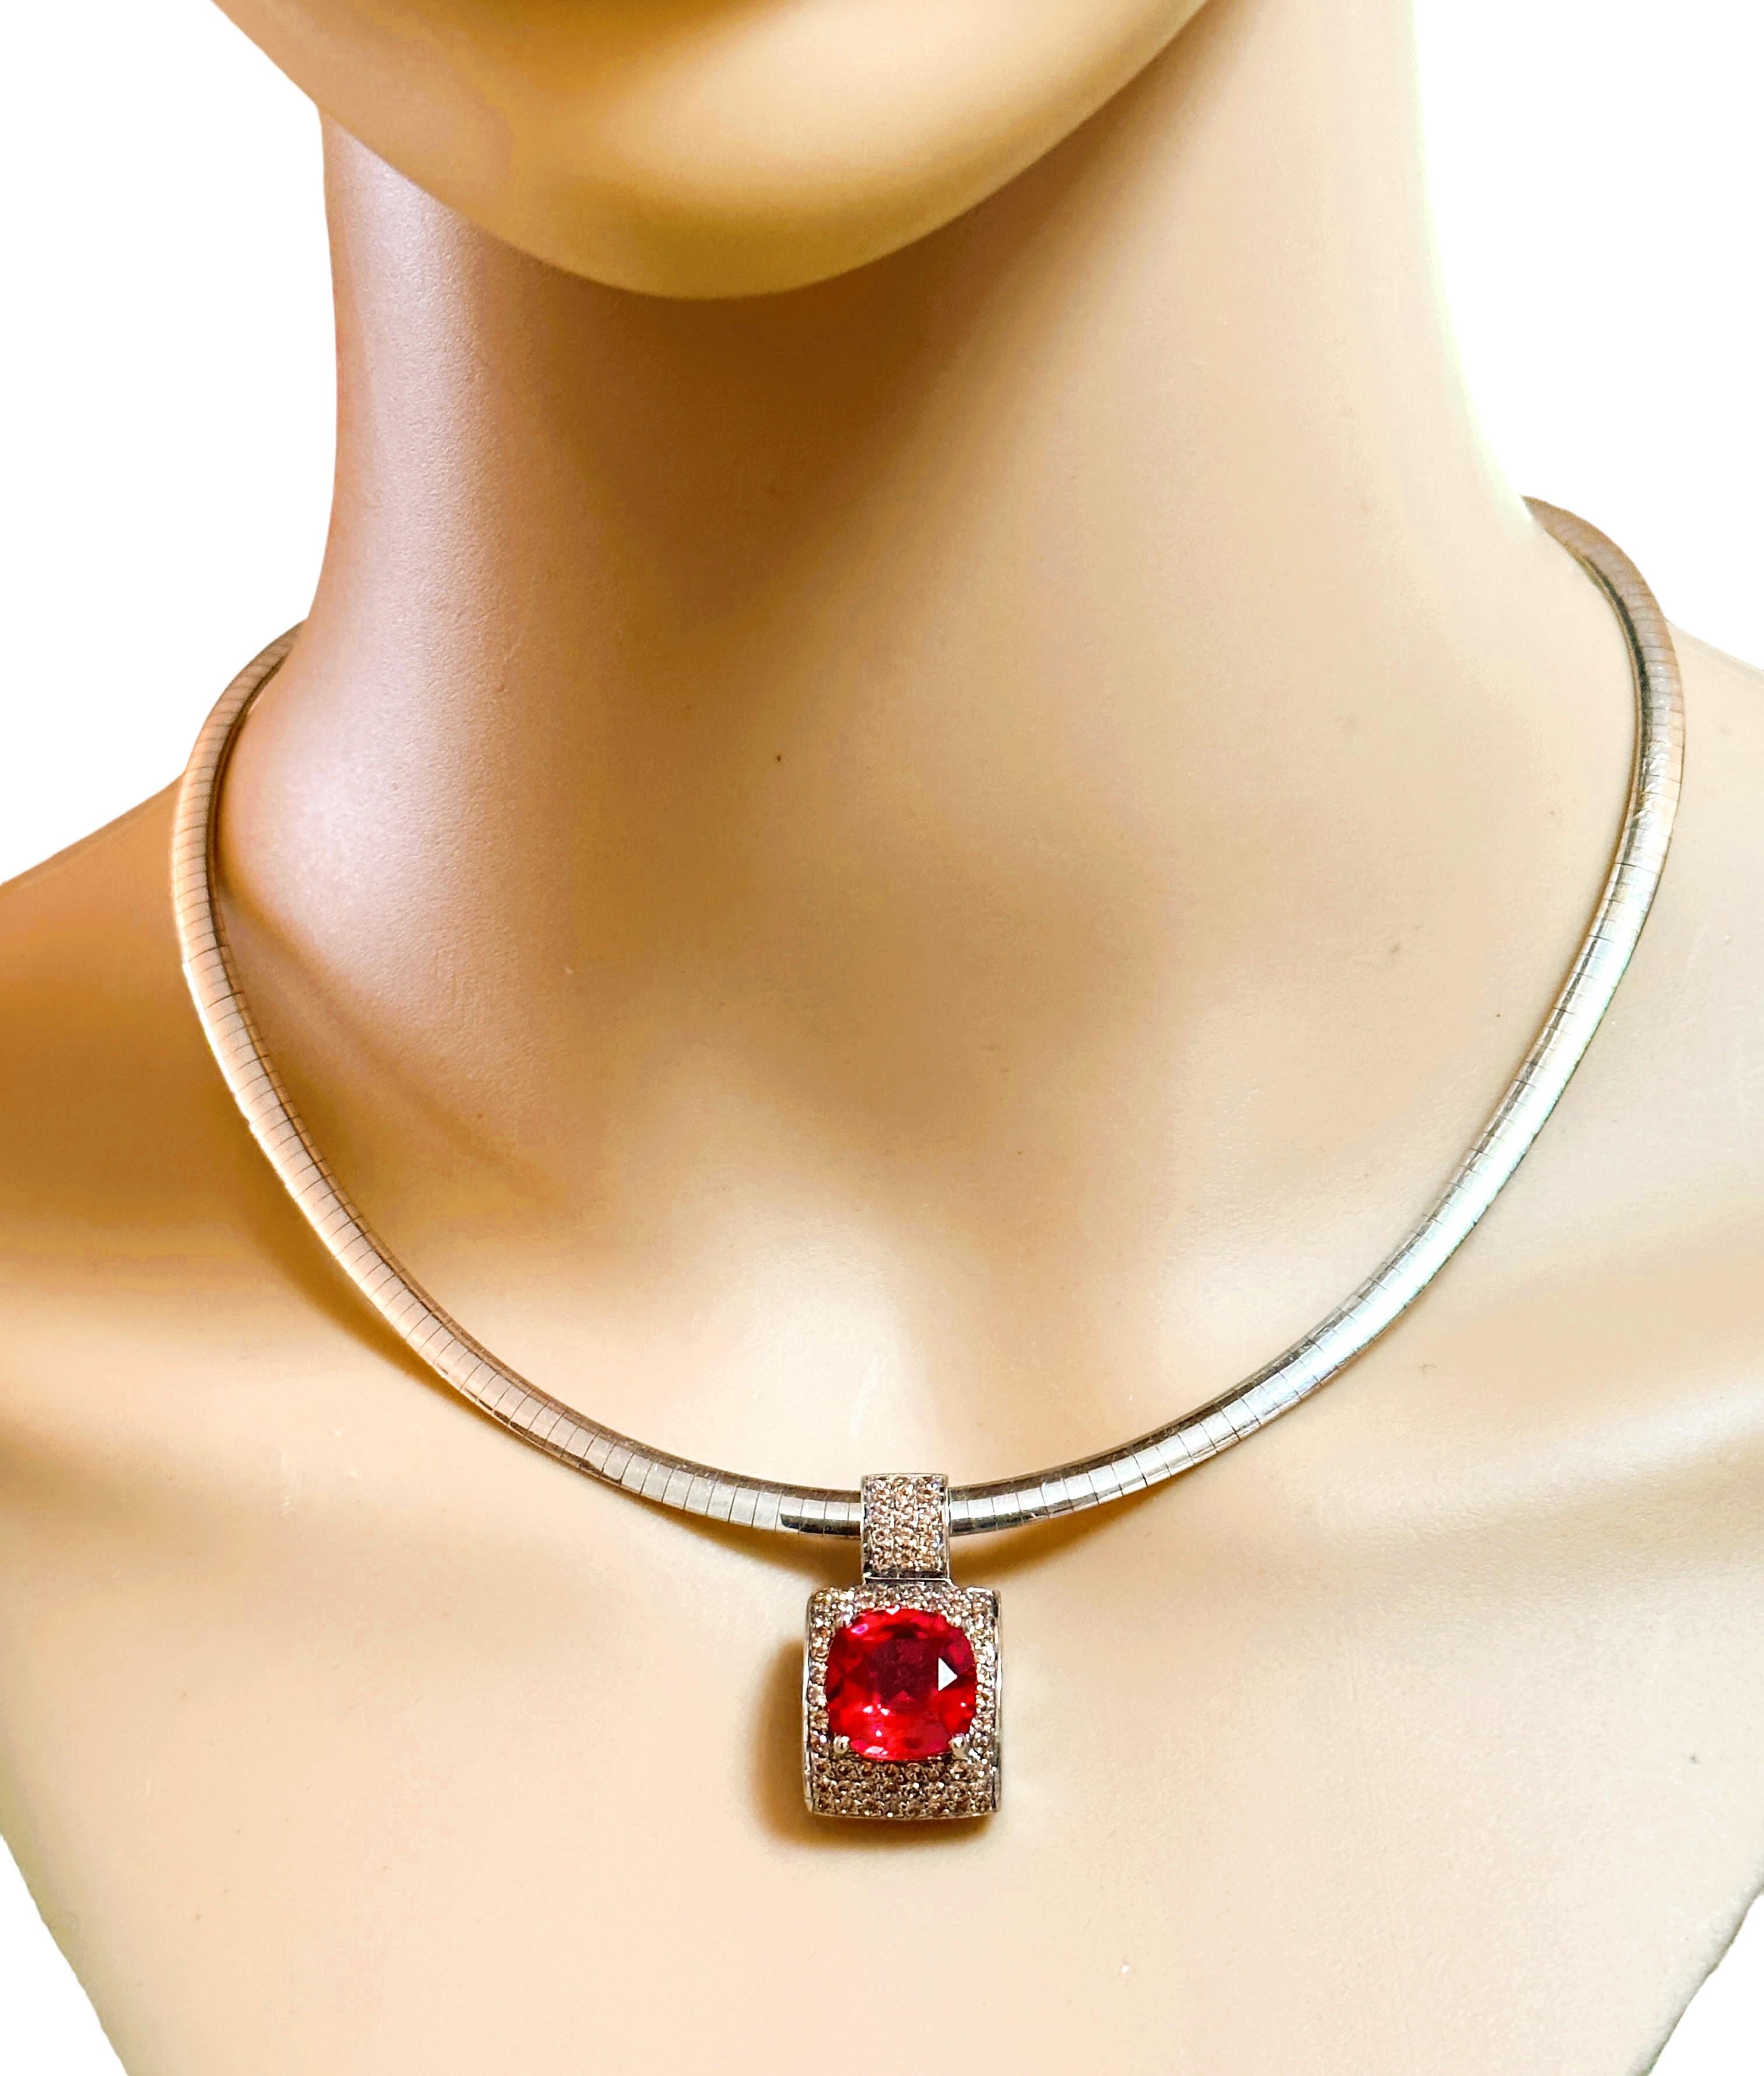 Emerald Cut New African If 10.7 Carat Pinkish Red and Champagne Sapphire Sterling Pendant